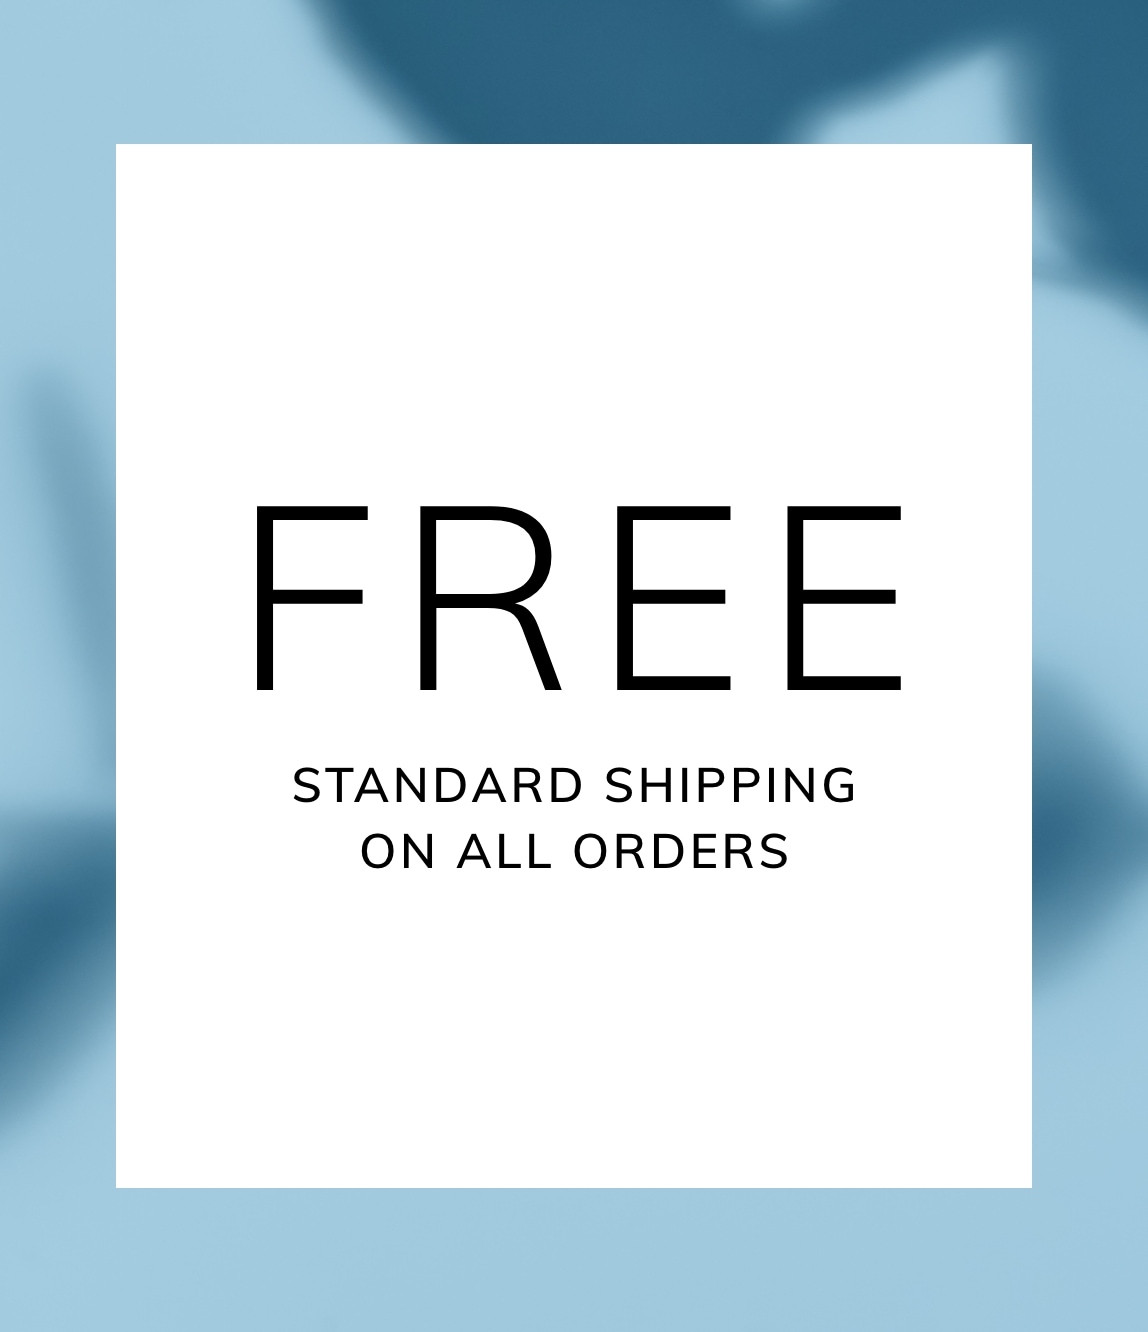 FREE STANDARD SHIPPING ON ALL ORDERS